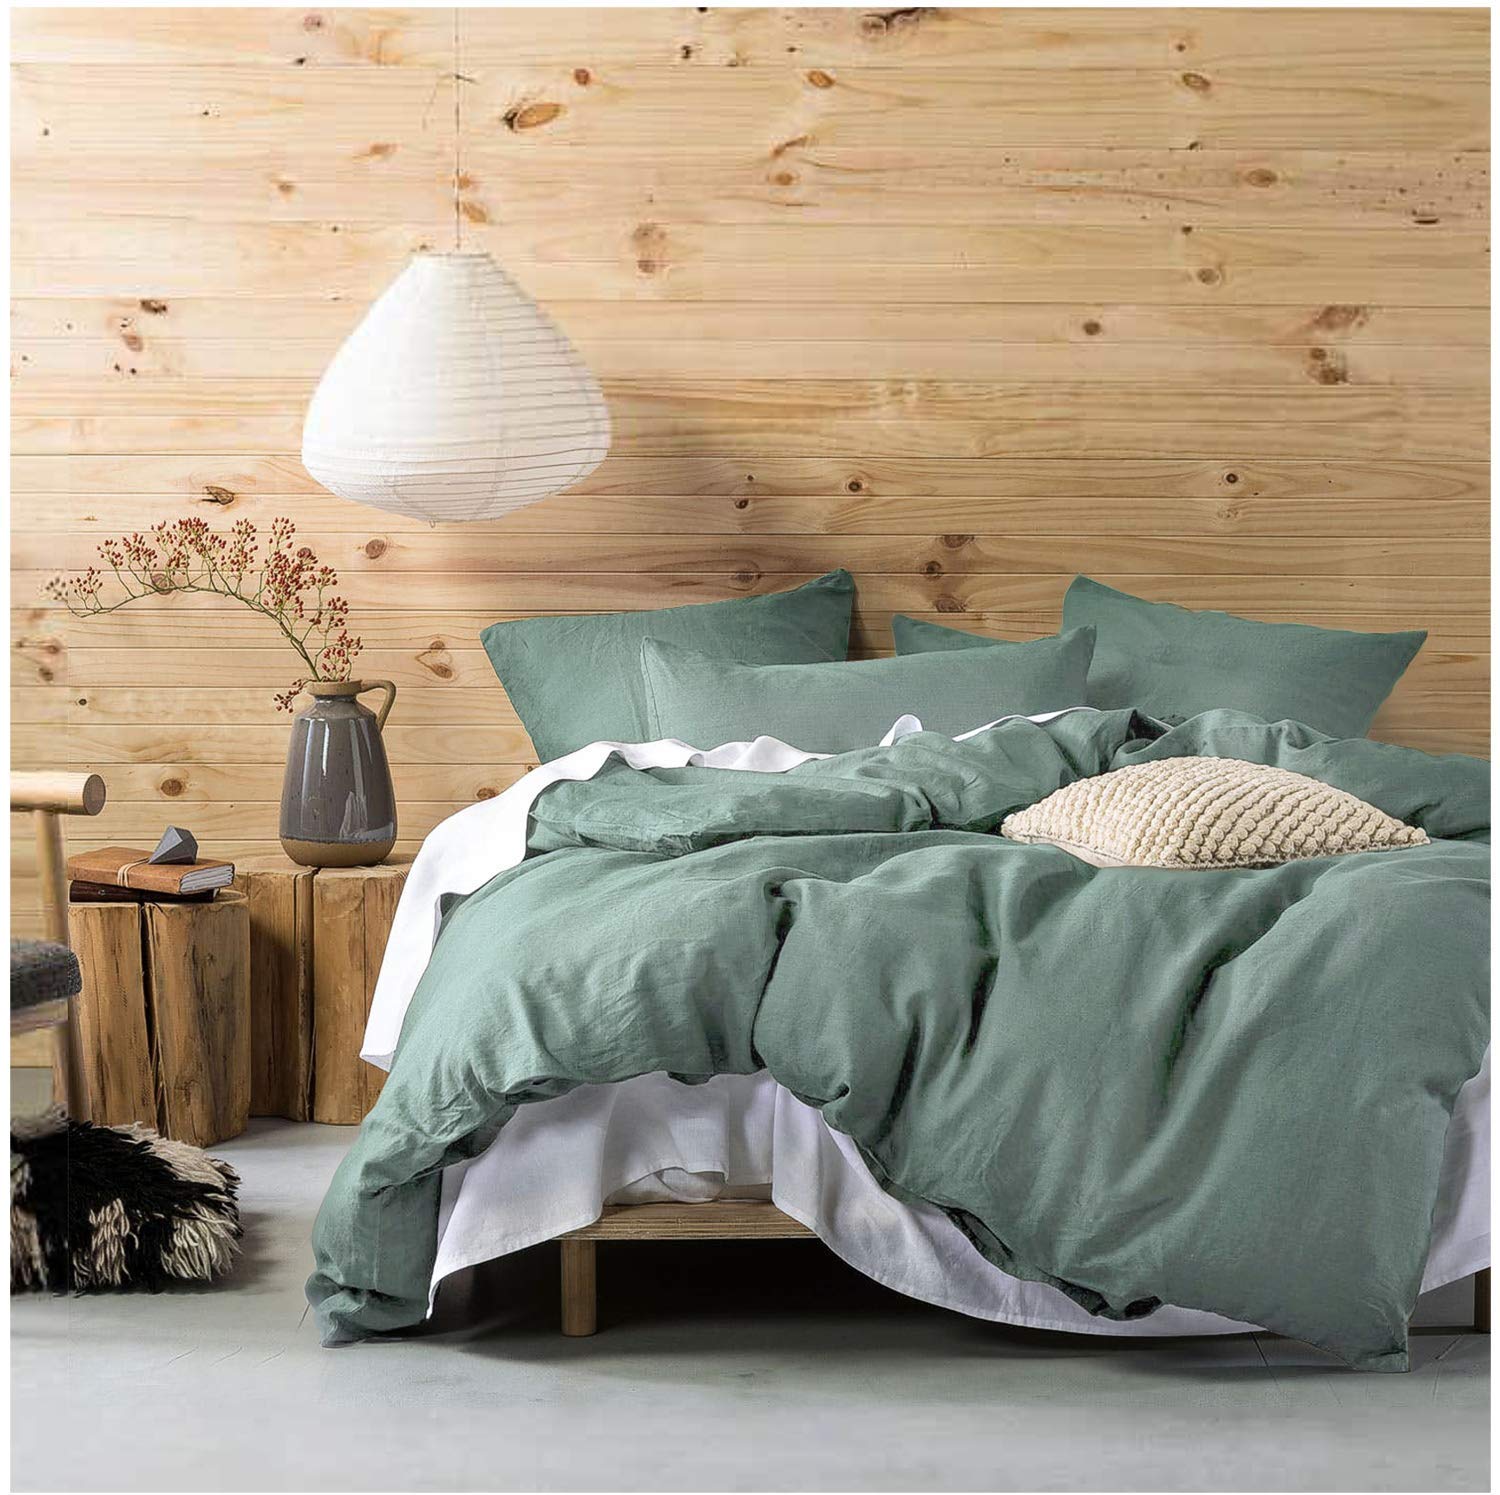 Beige, King Solid Color Casual Simple Style Chambray Duvet Cover Beige Duvet Cover King 100% Yarn Dyed Washed Cotton 3 Pieces Bedding Set Relaxed Soft Feel Natural Wrinkled Breathable Easy Care 